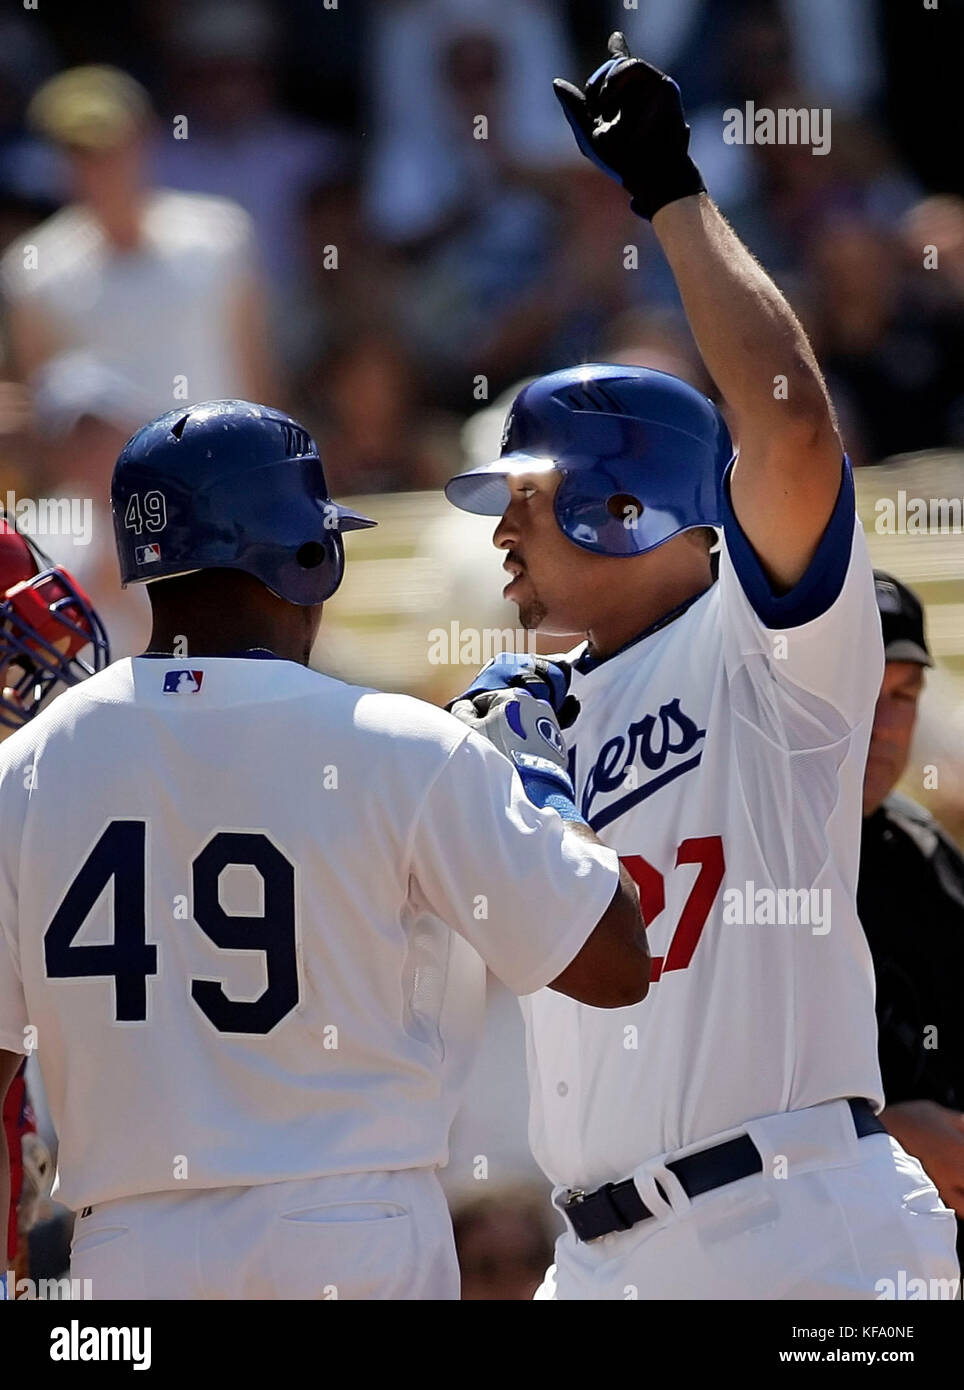 Los Angeles Dodgers Matt Kemp, right, celebrates with teammate Willy Aybar at home plate after hitting a two-run homer off Philadelphia Phillies pitcher Clay Condrey in the seventh inning of a baseball game in Los Angeles on Saturday, June 3, 2006. Photo by Francis Specker Stock Photo